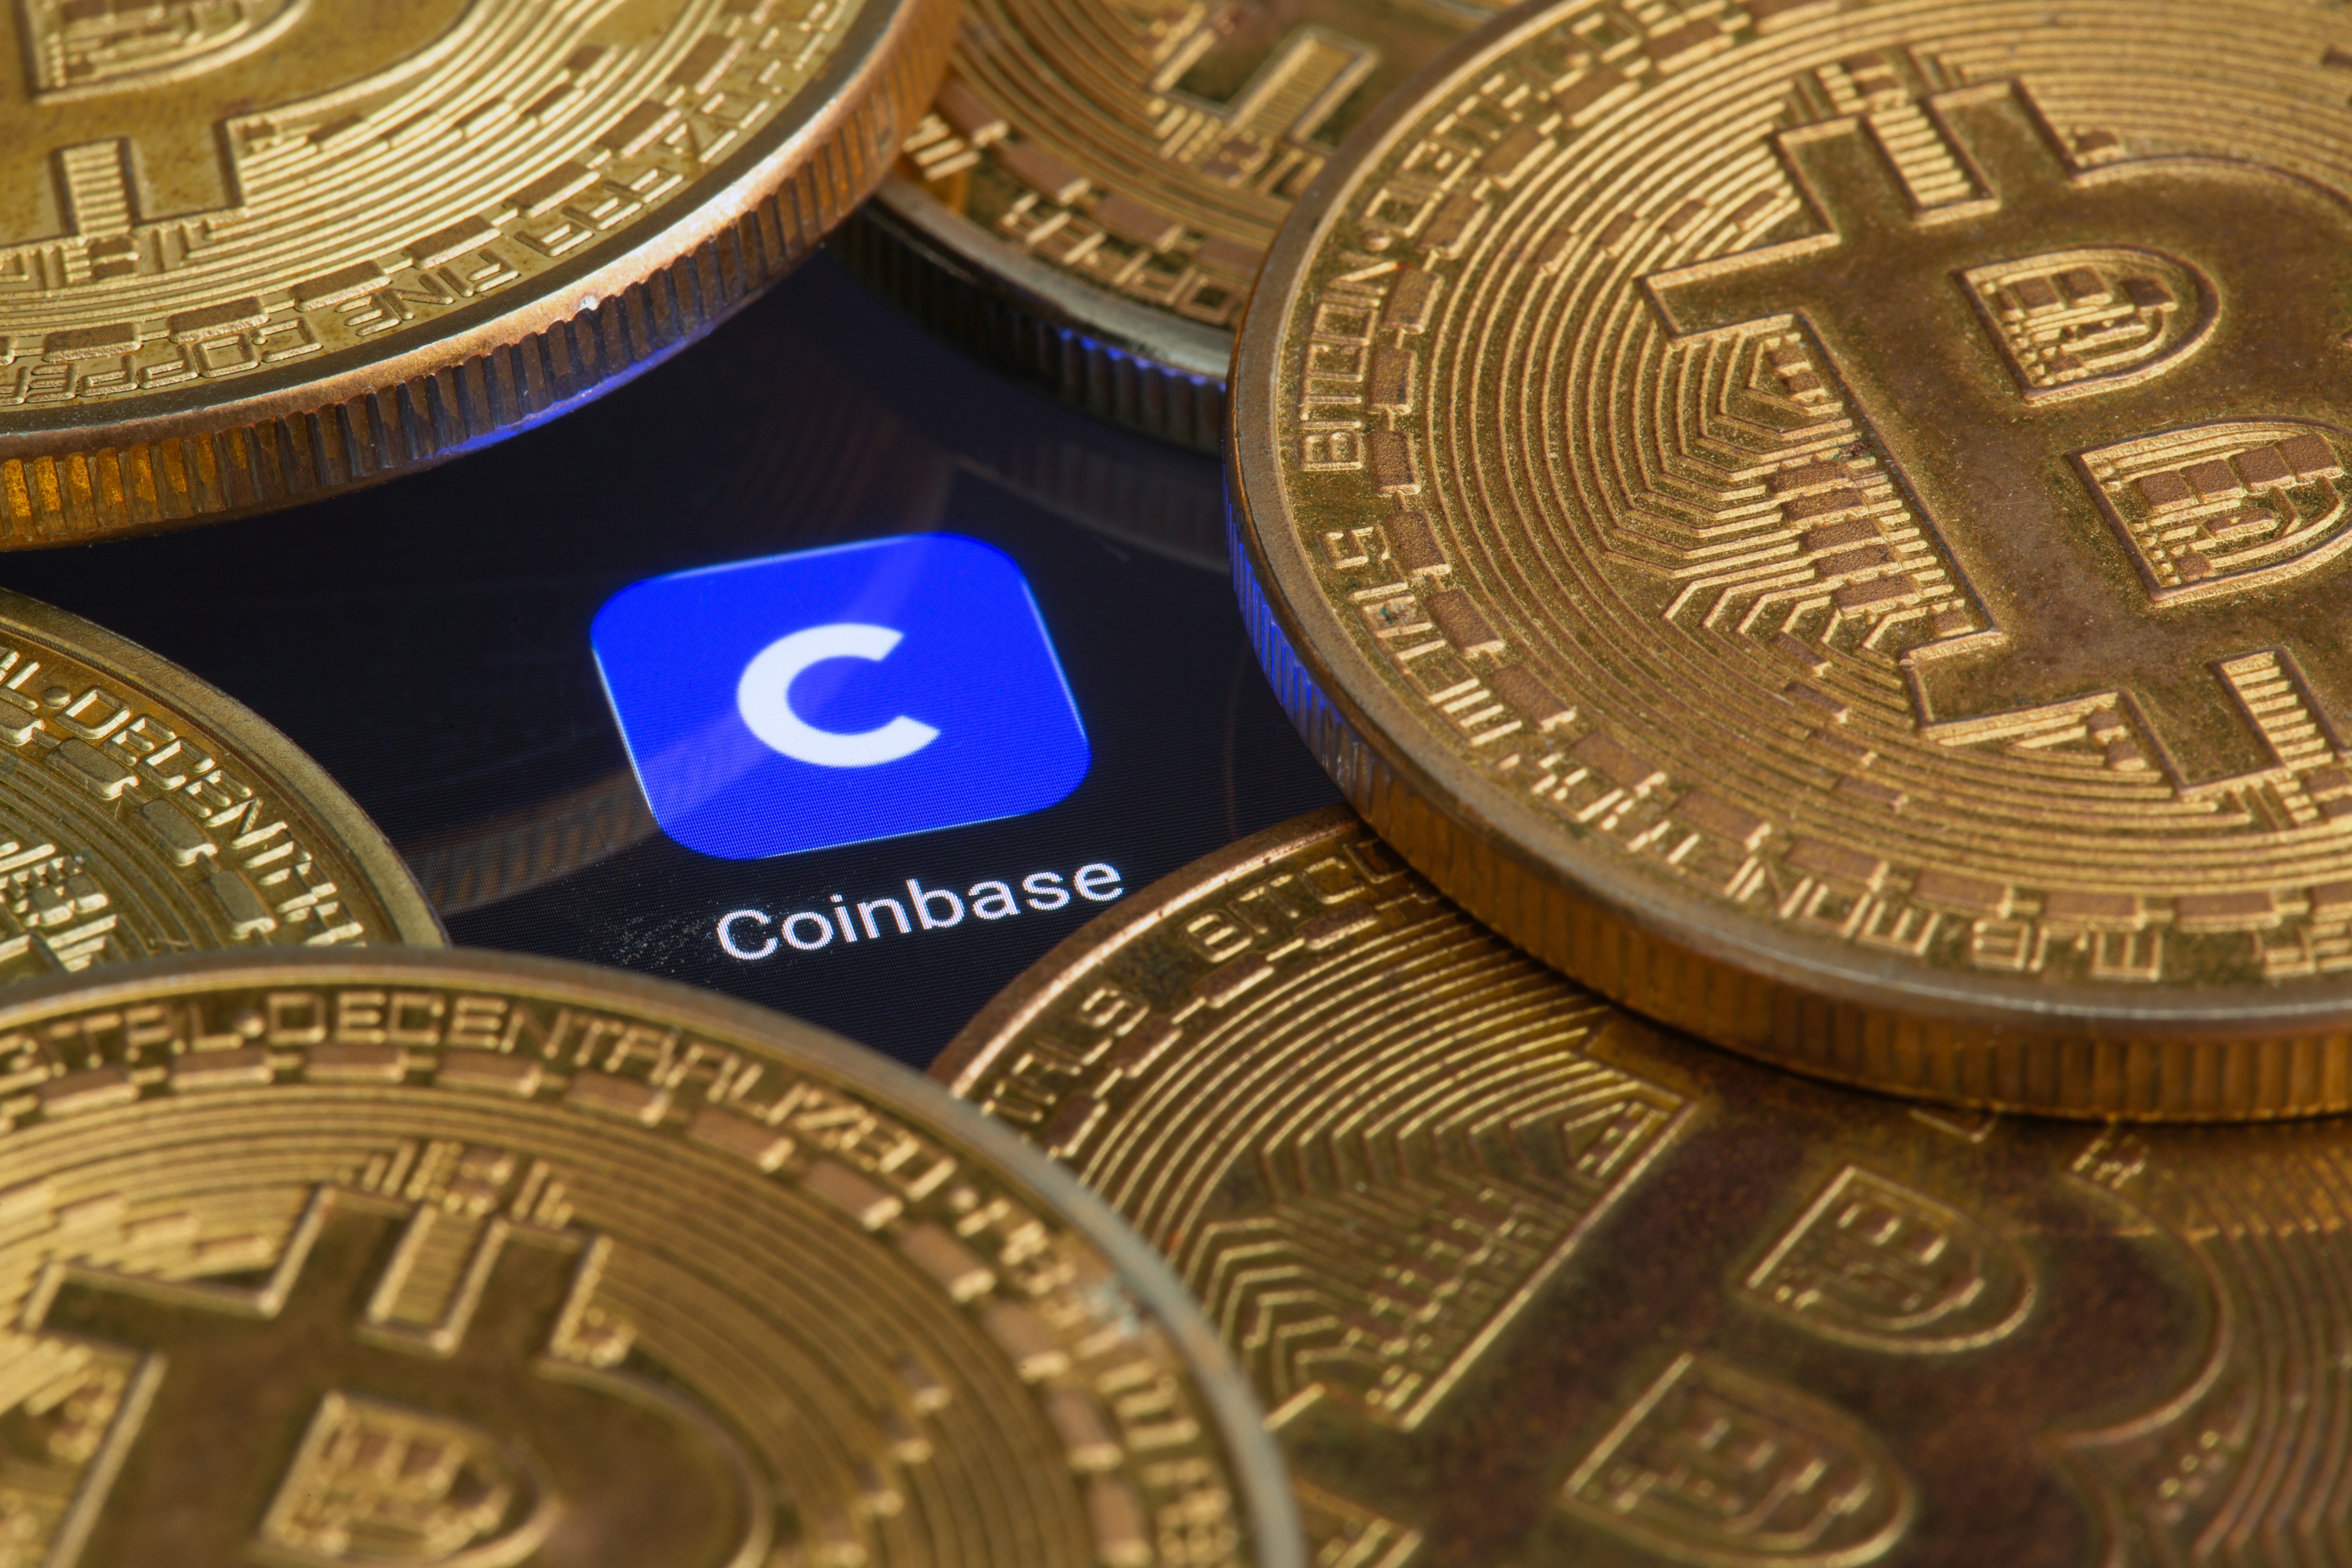 Coinbase Institutional Clients Raised Bitcoin (BTC) Exposure By 296% In 15 Months